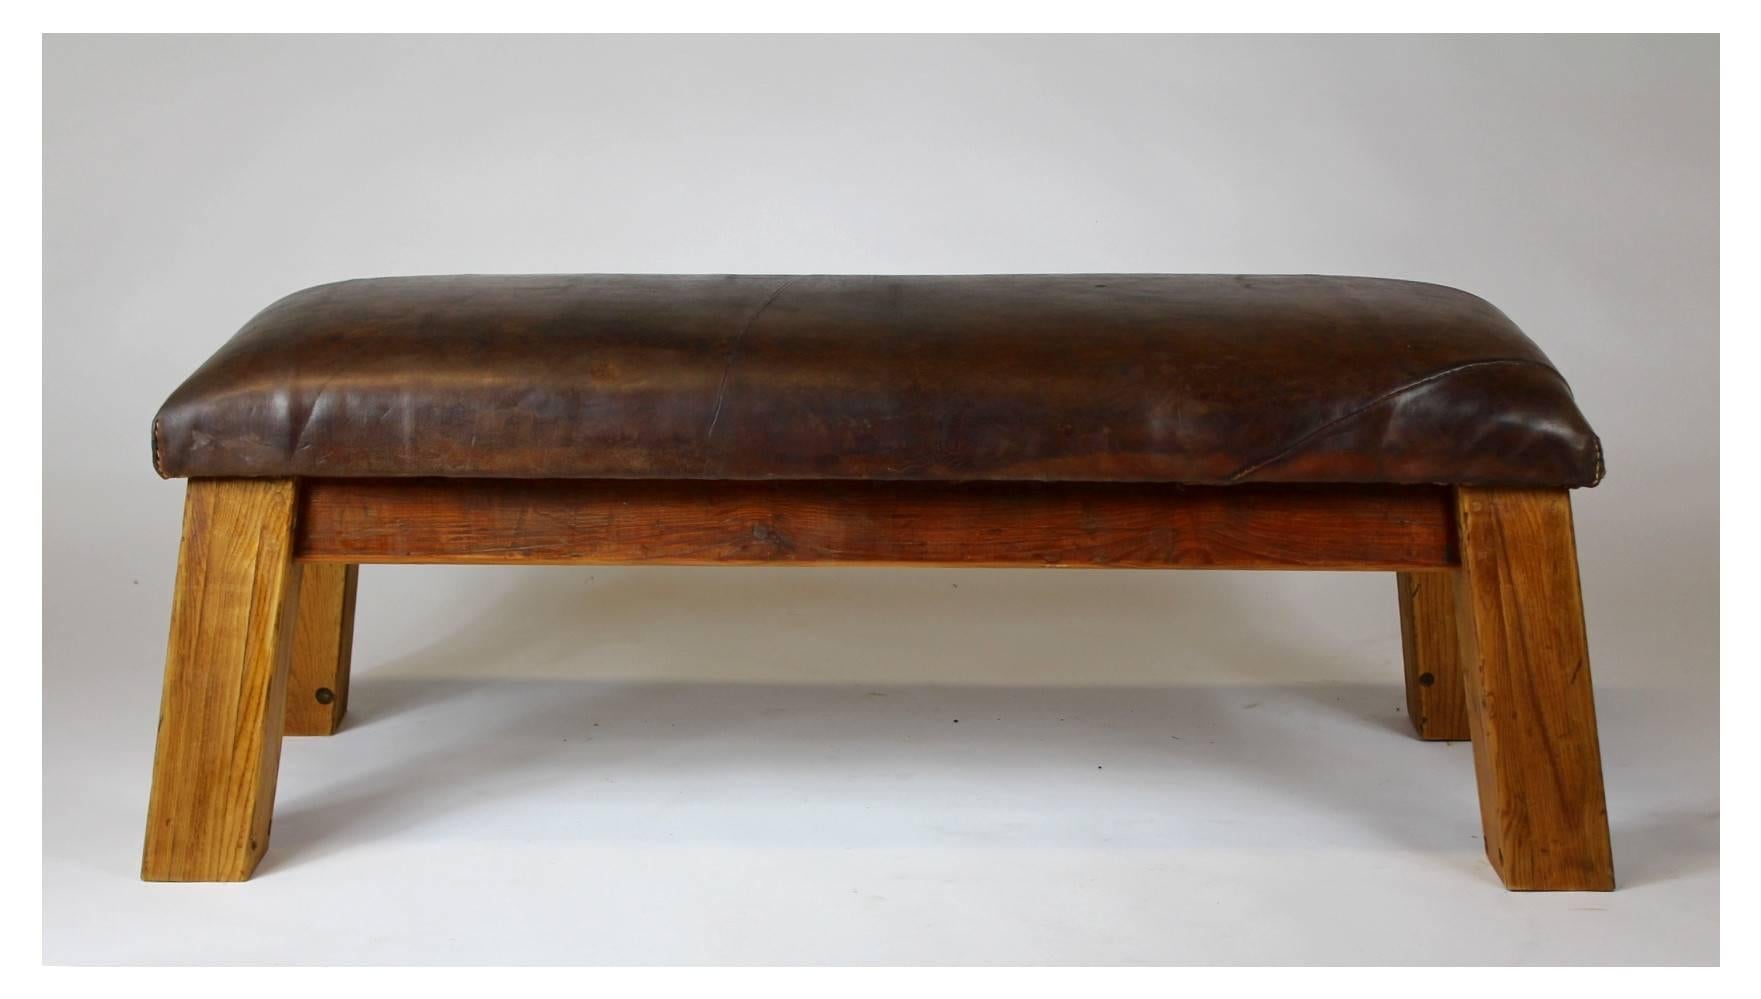 Leather gym bench from the 1940s. The bench is in its good original condition with great patina.